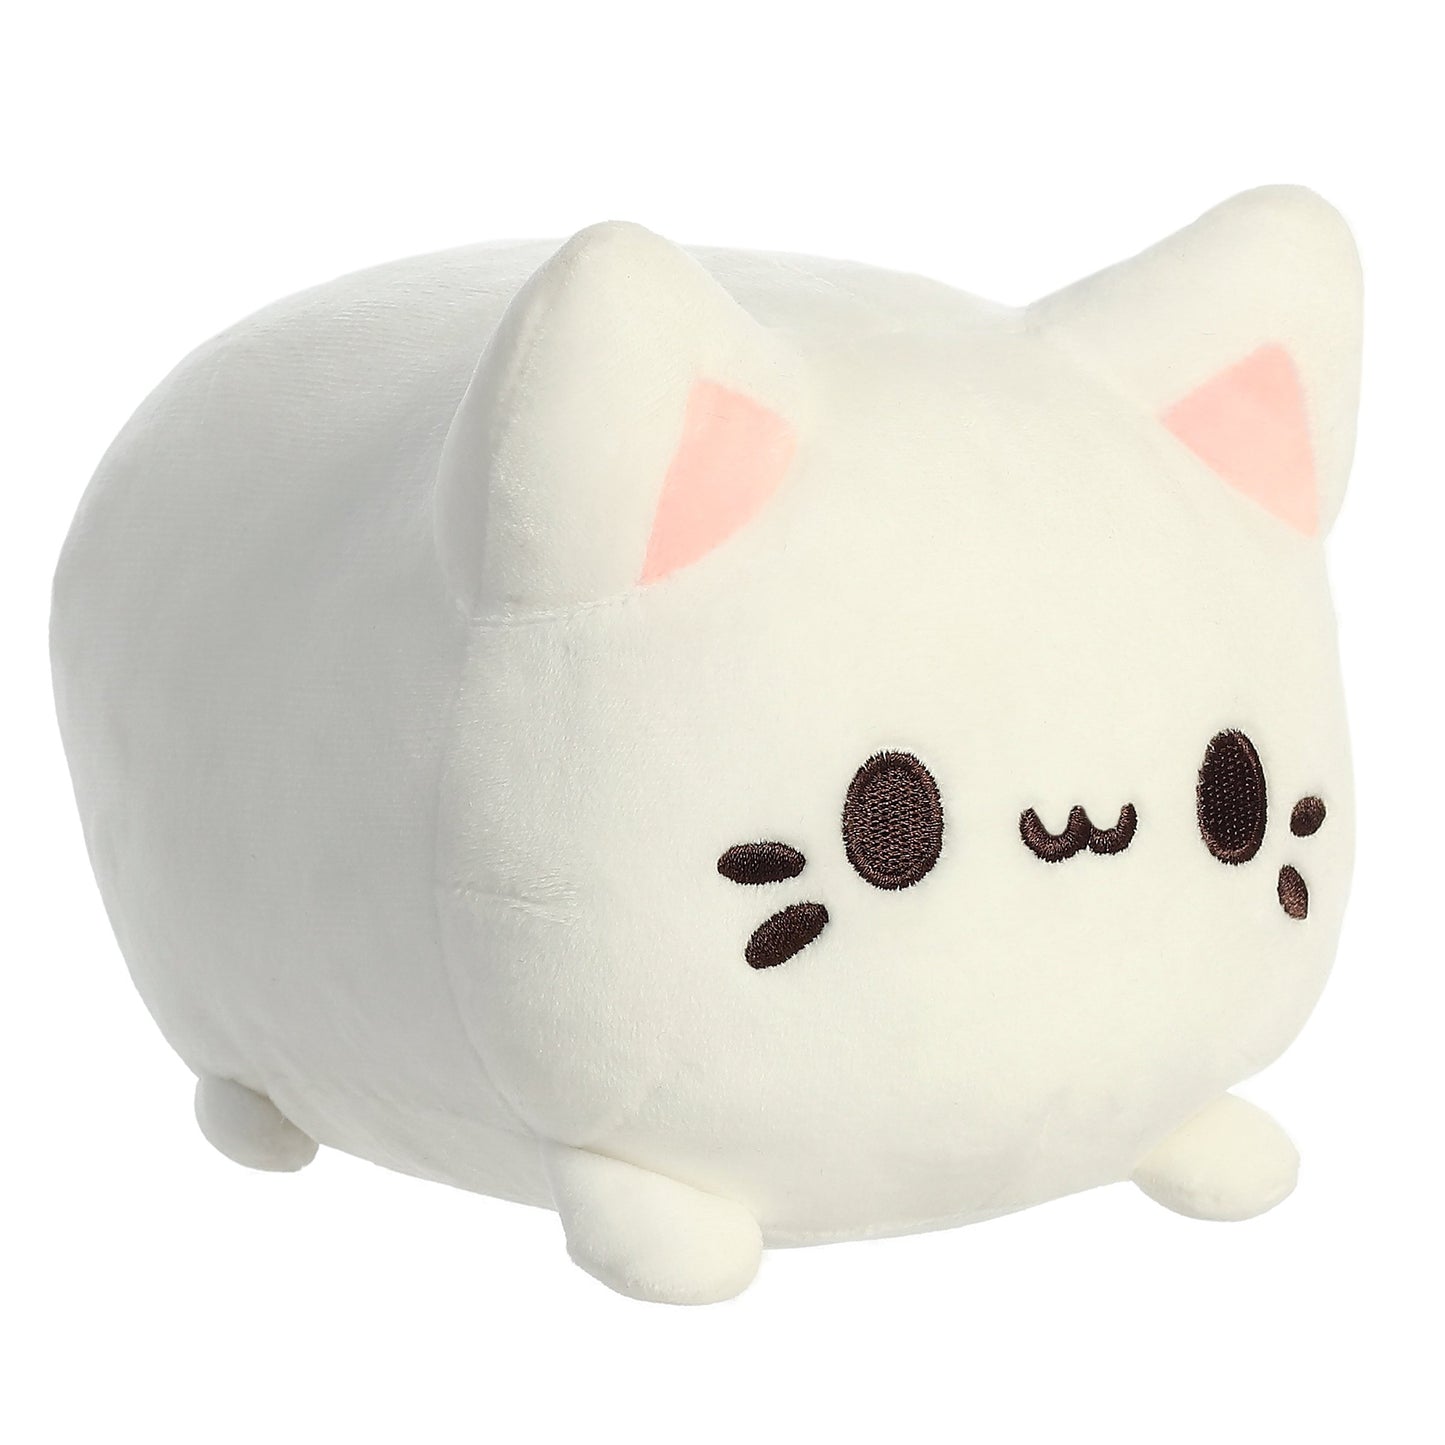 Made with milk, egg, and sugar, this custard Meowchi has a delightful vanilla taste! The custard Meowchi is overstuffed and made from a wonderfully soft minky fabric with embroidered features!